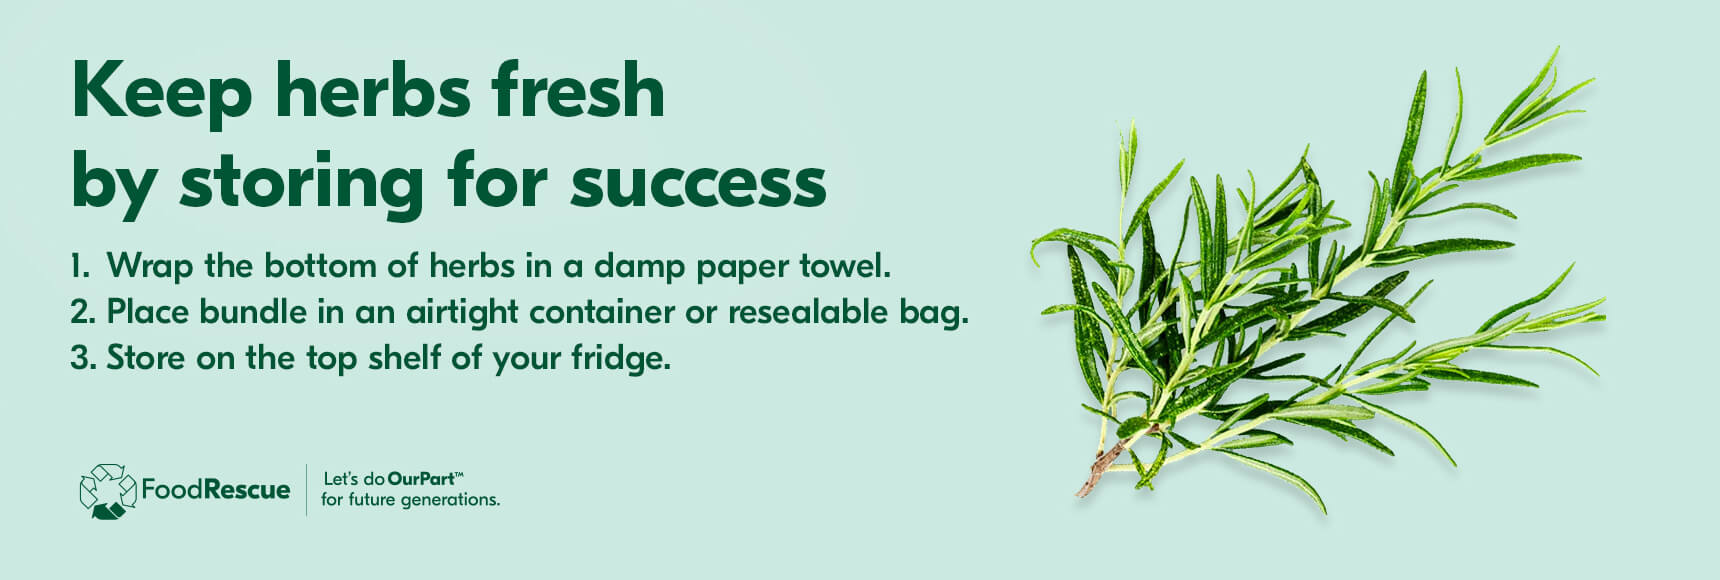 Text Reading 'Keep herbs fresh by storing for success. 1. Wrap the bottom of herbs in a damp paper towel. 2. Place bundle in an airtight container or resealable bag. 3. Store on the top shelf of your fridge.'